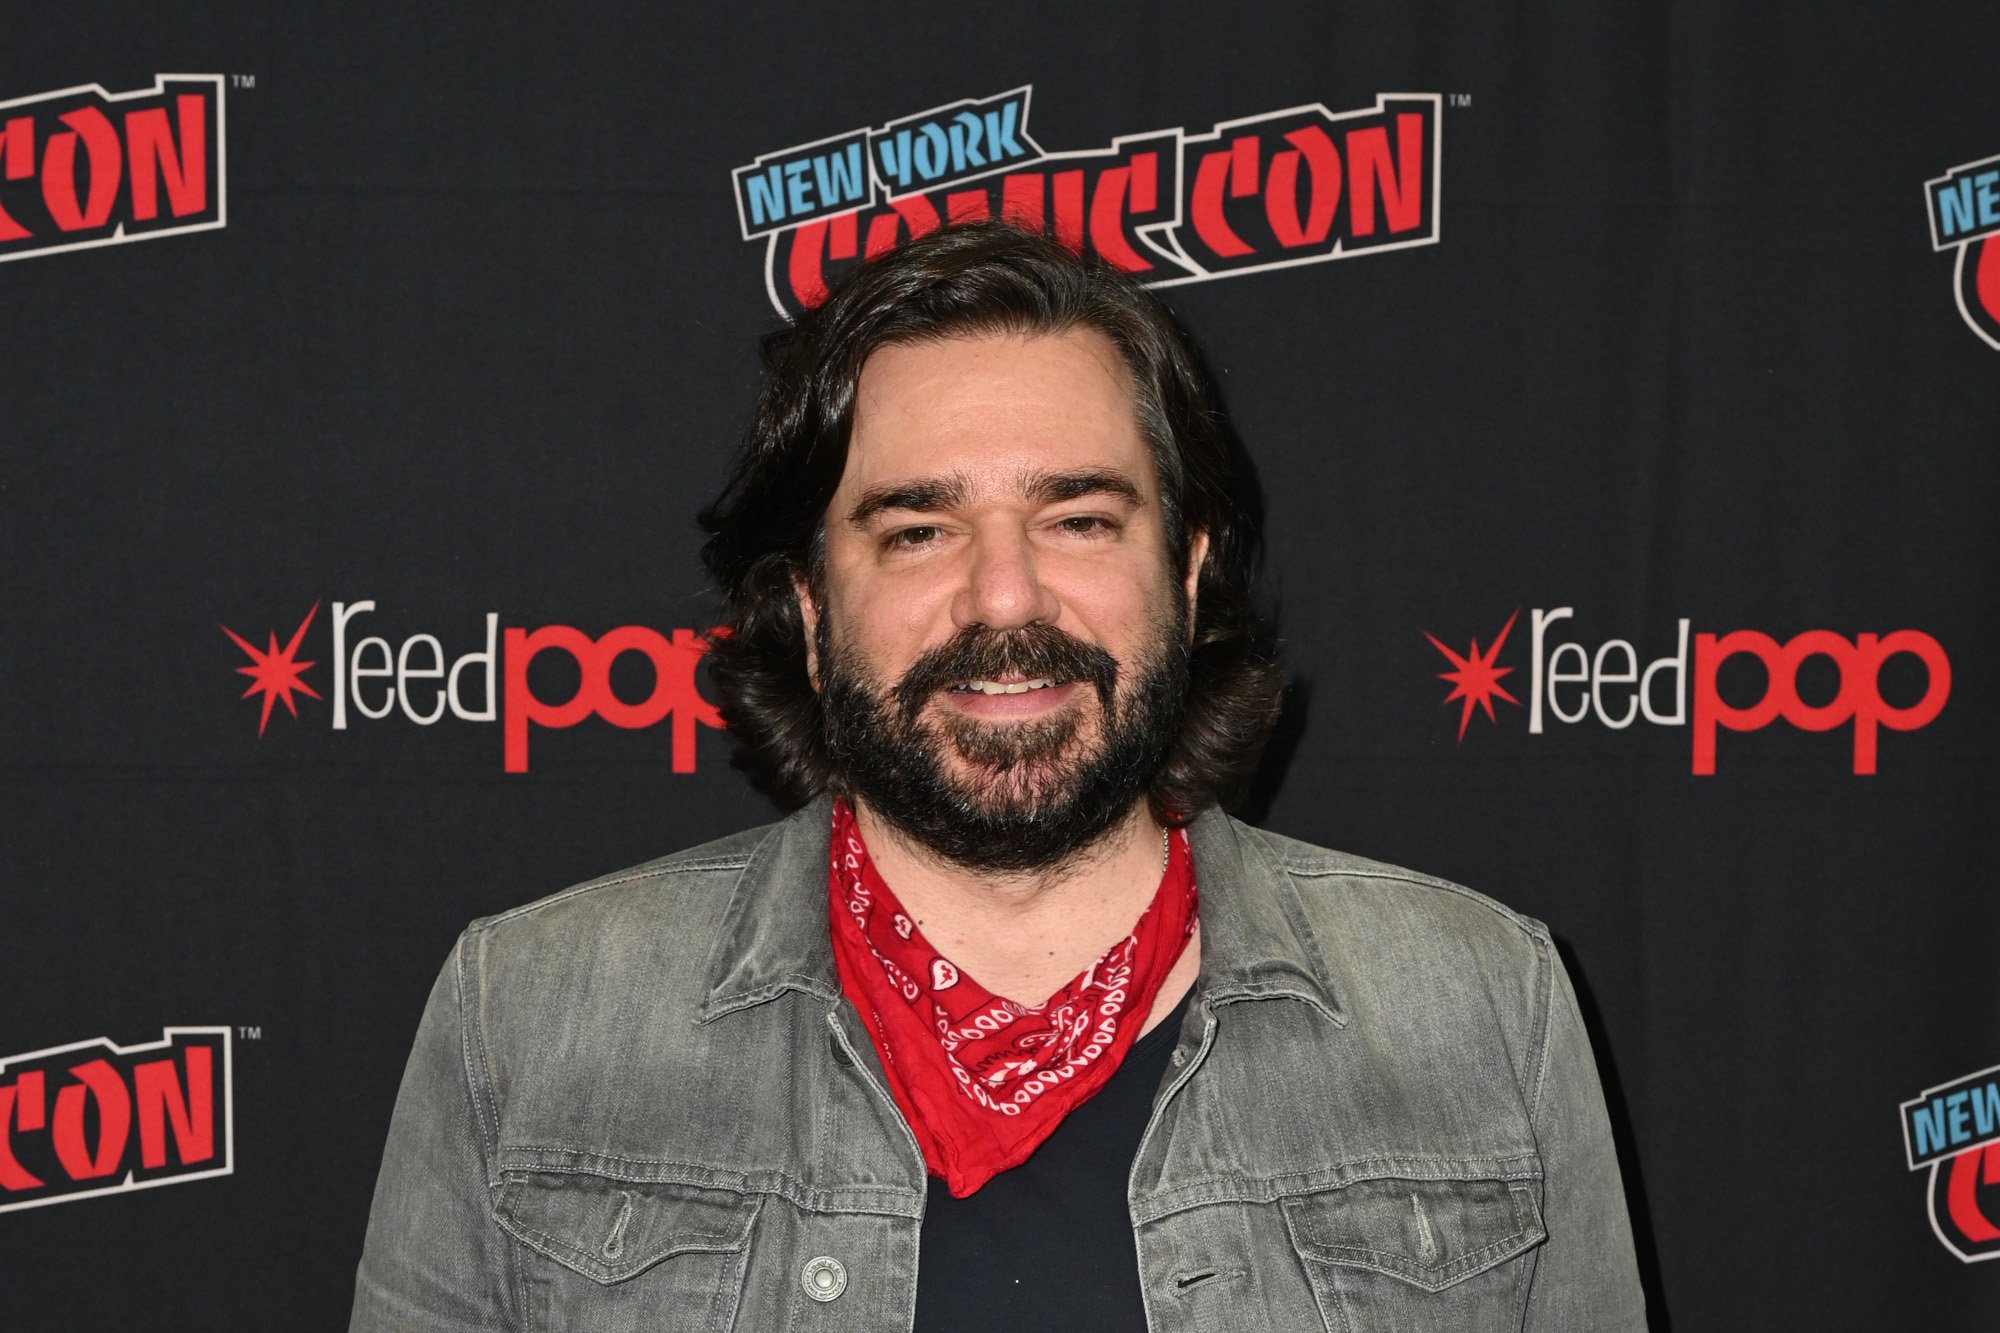 'The Book of Boba Fett' and 'What We Do in the Shadows' star Matt Berry. He's wearing a denim jacket and red bandana around his neck and standing in front of a New York Comic-Con wall.